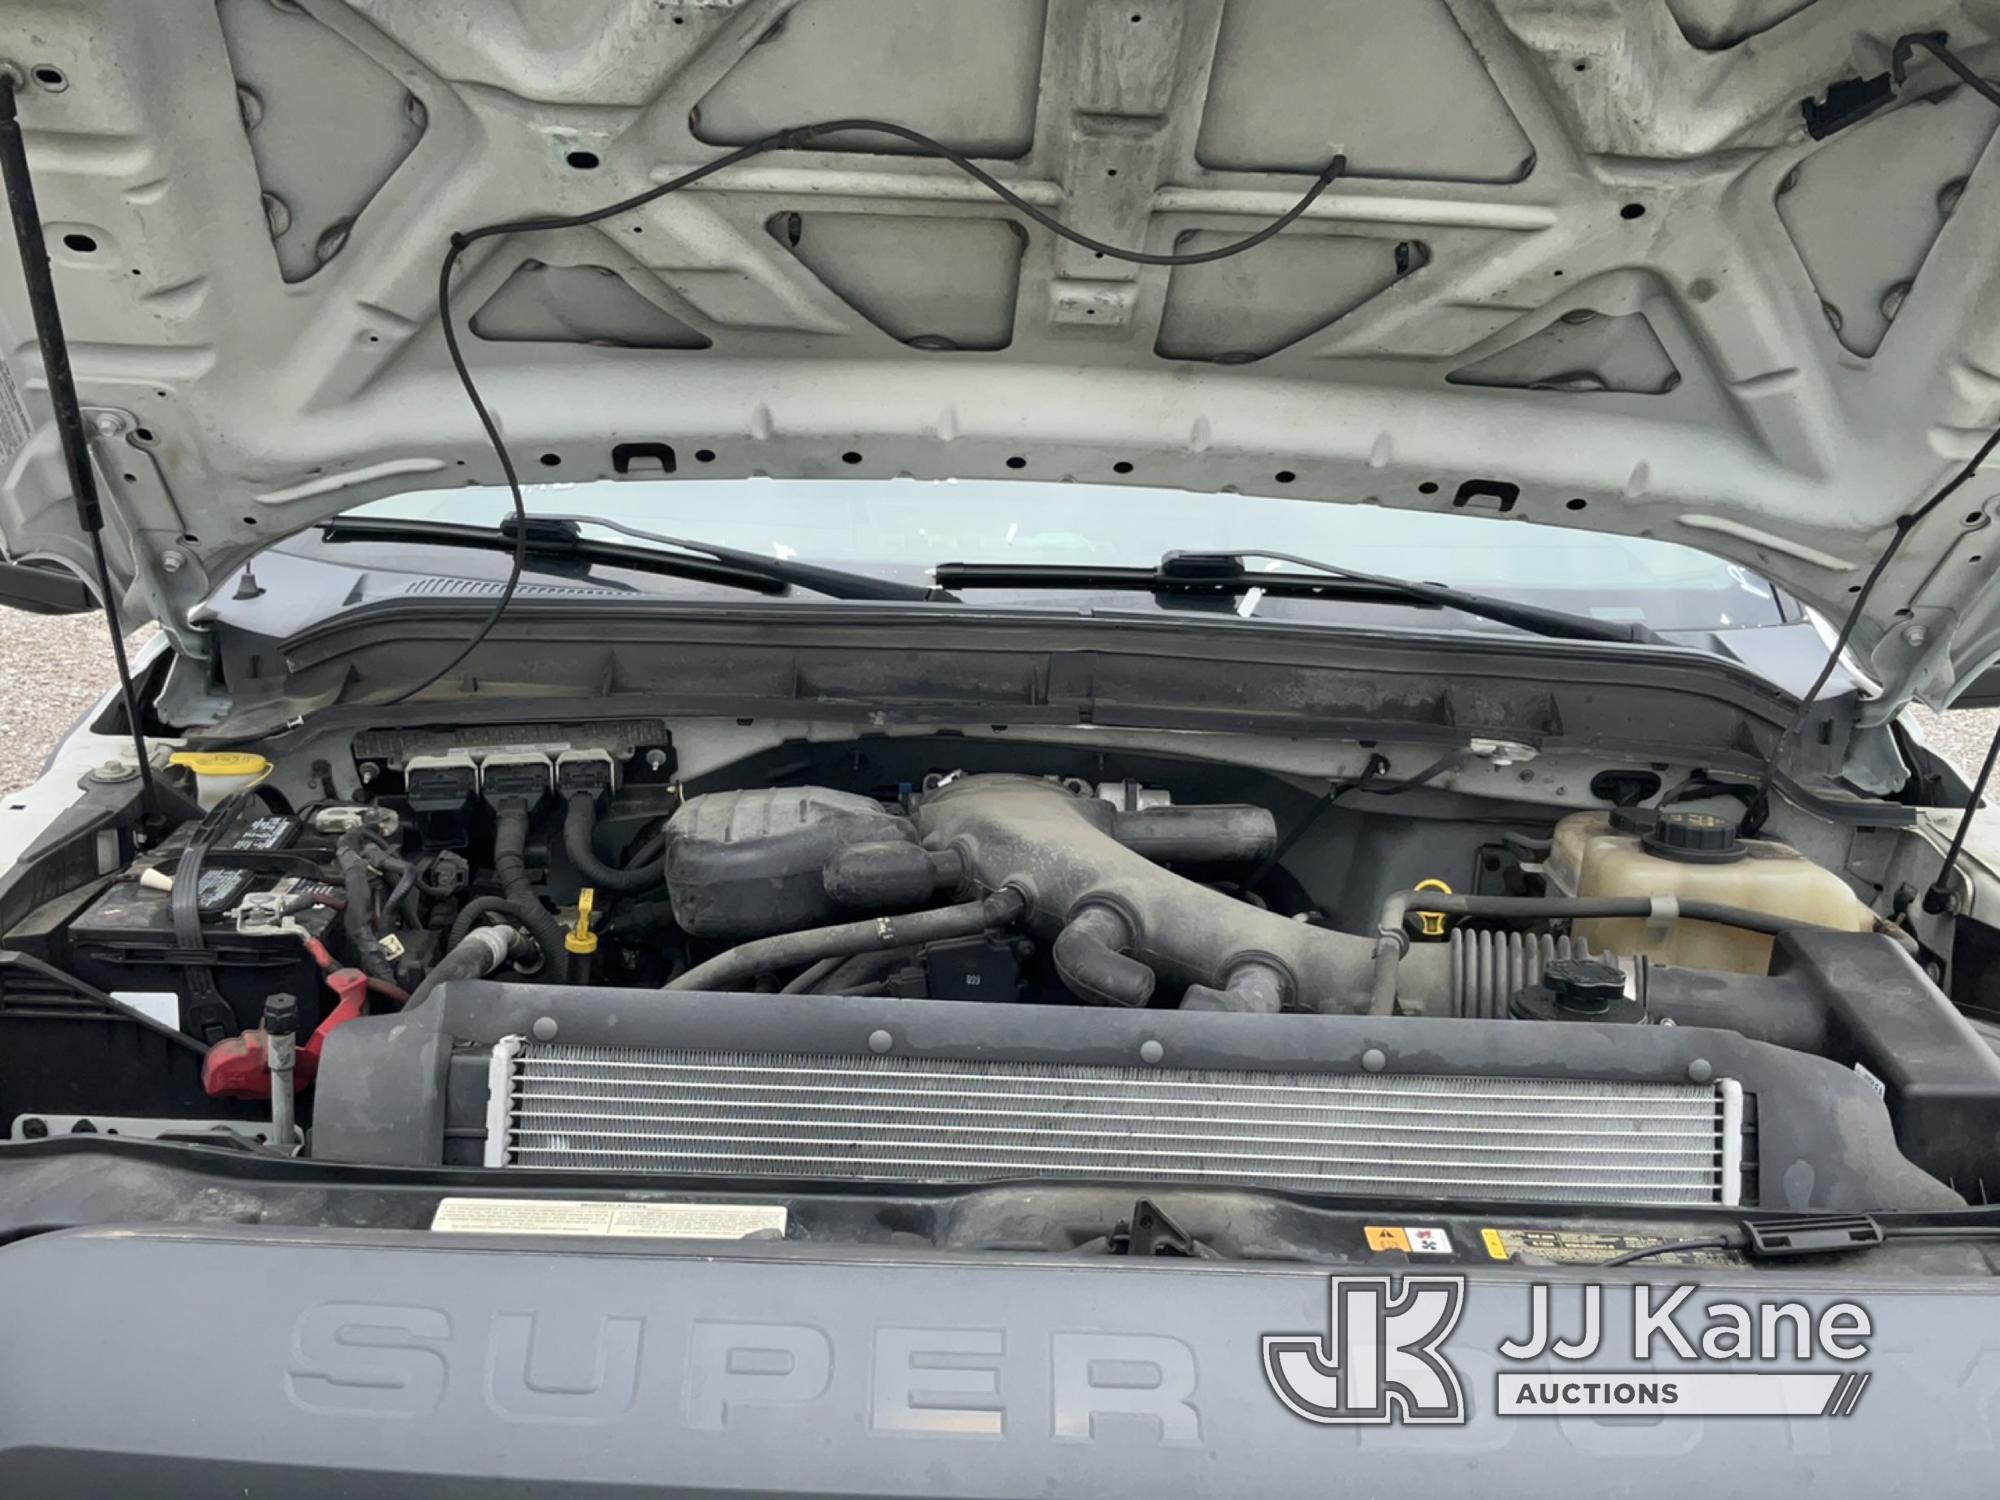 (Verona, KY) 2014 Ford F450 Crew-Cab Flatbed Truck Runs & Moves) (Check Engine Light On, Engine Tick